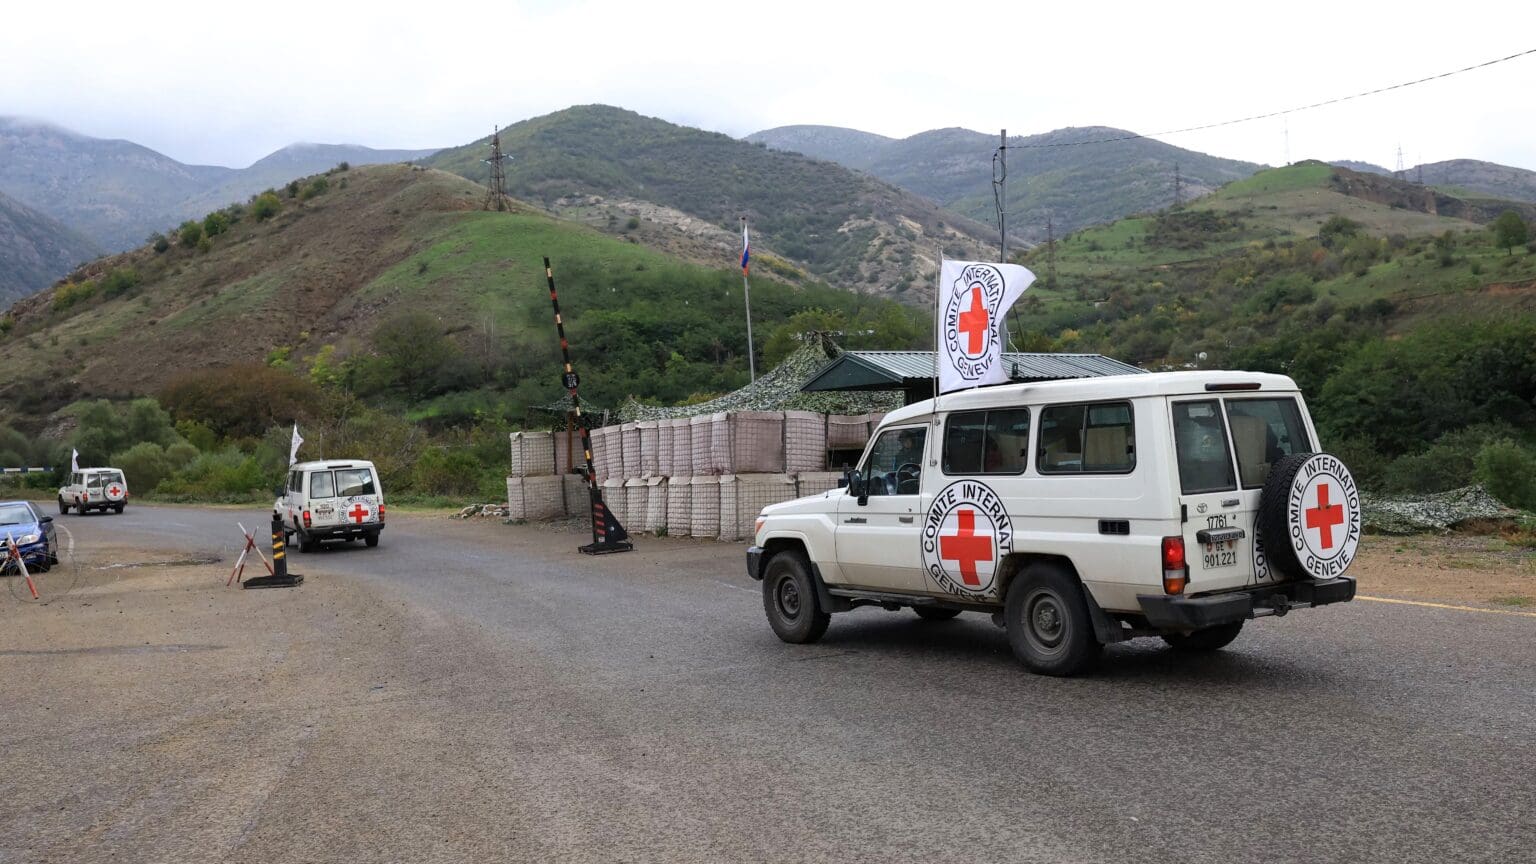 Hungary Supports Armenian Red Cross with 40 Million HUF through Hungary Helps Programme